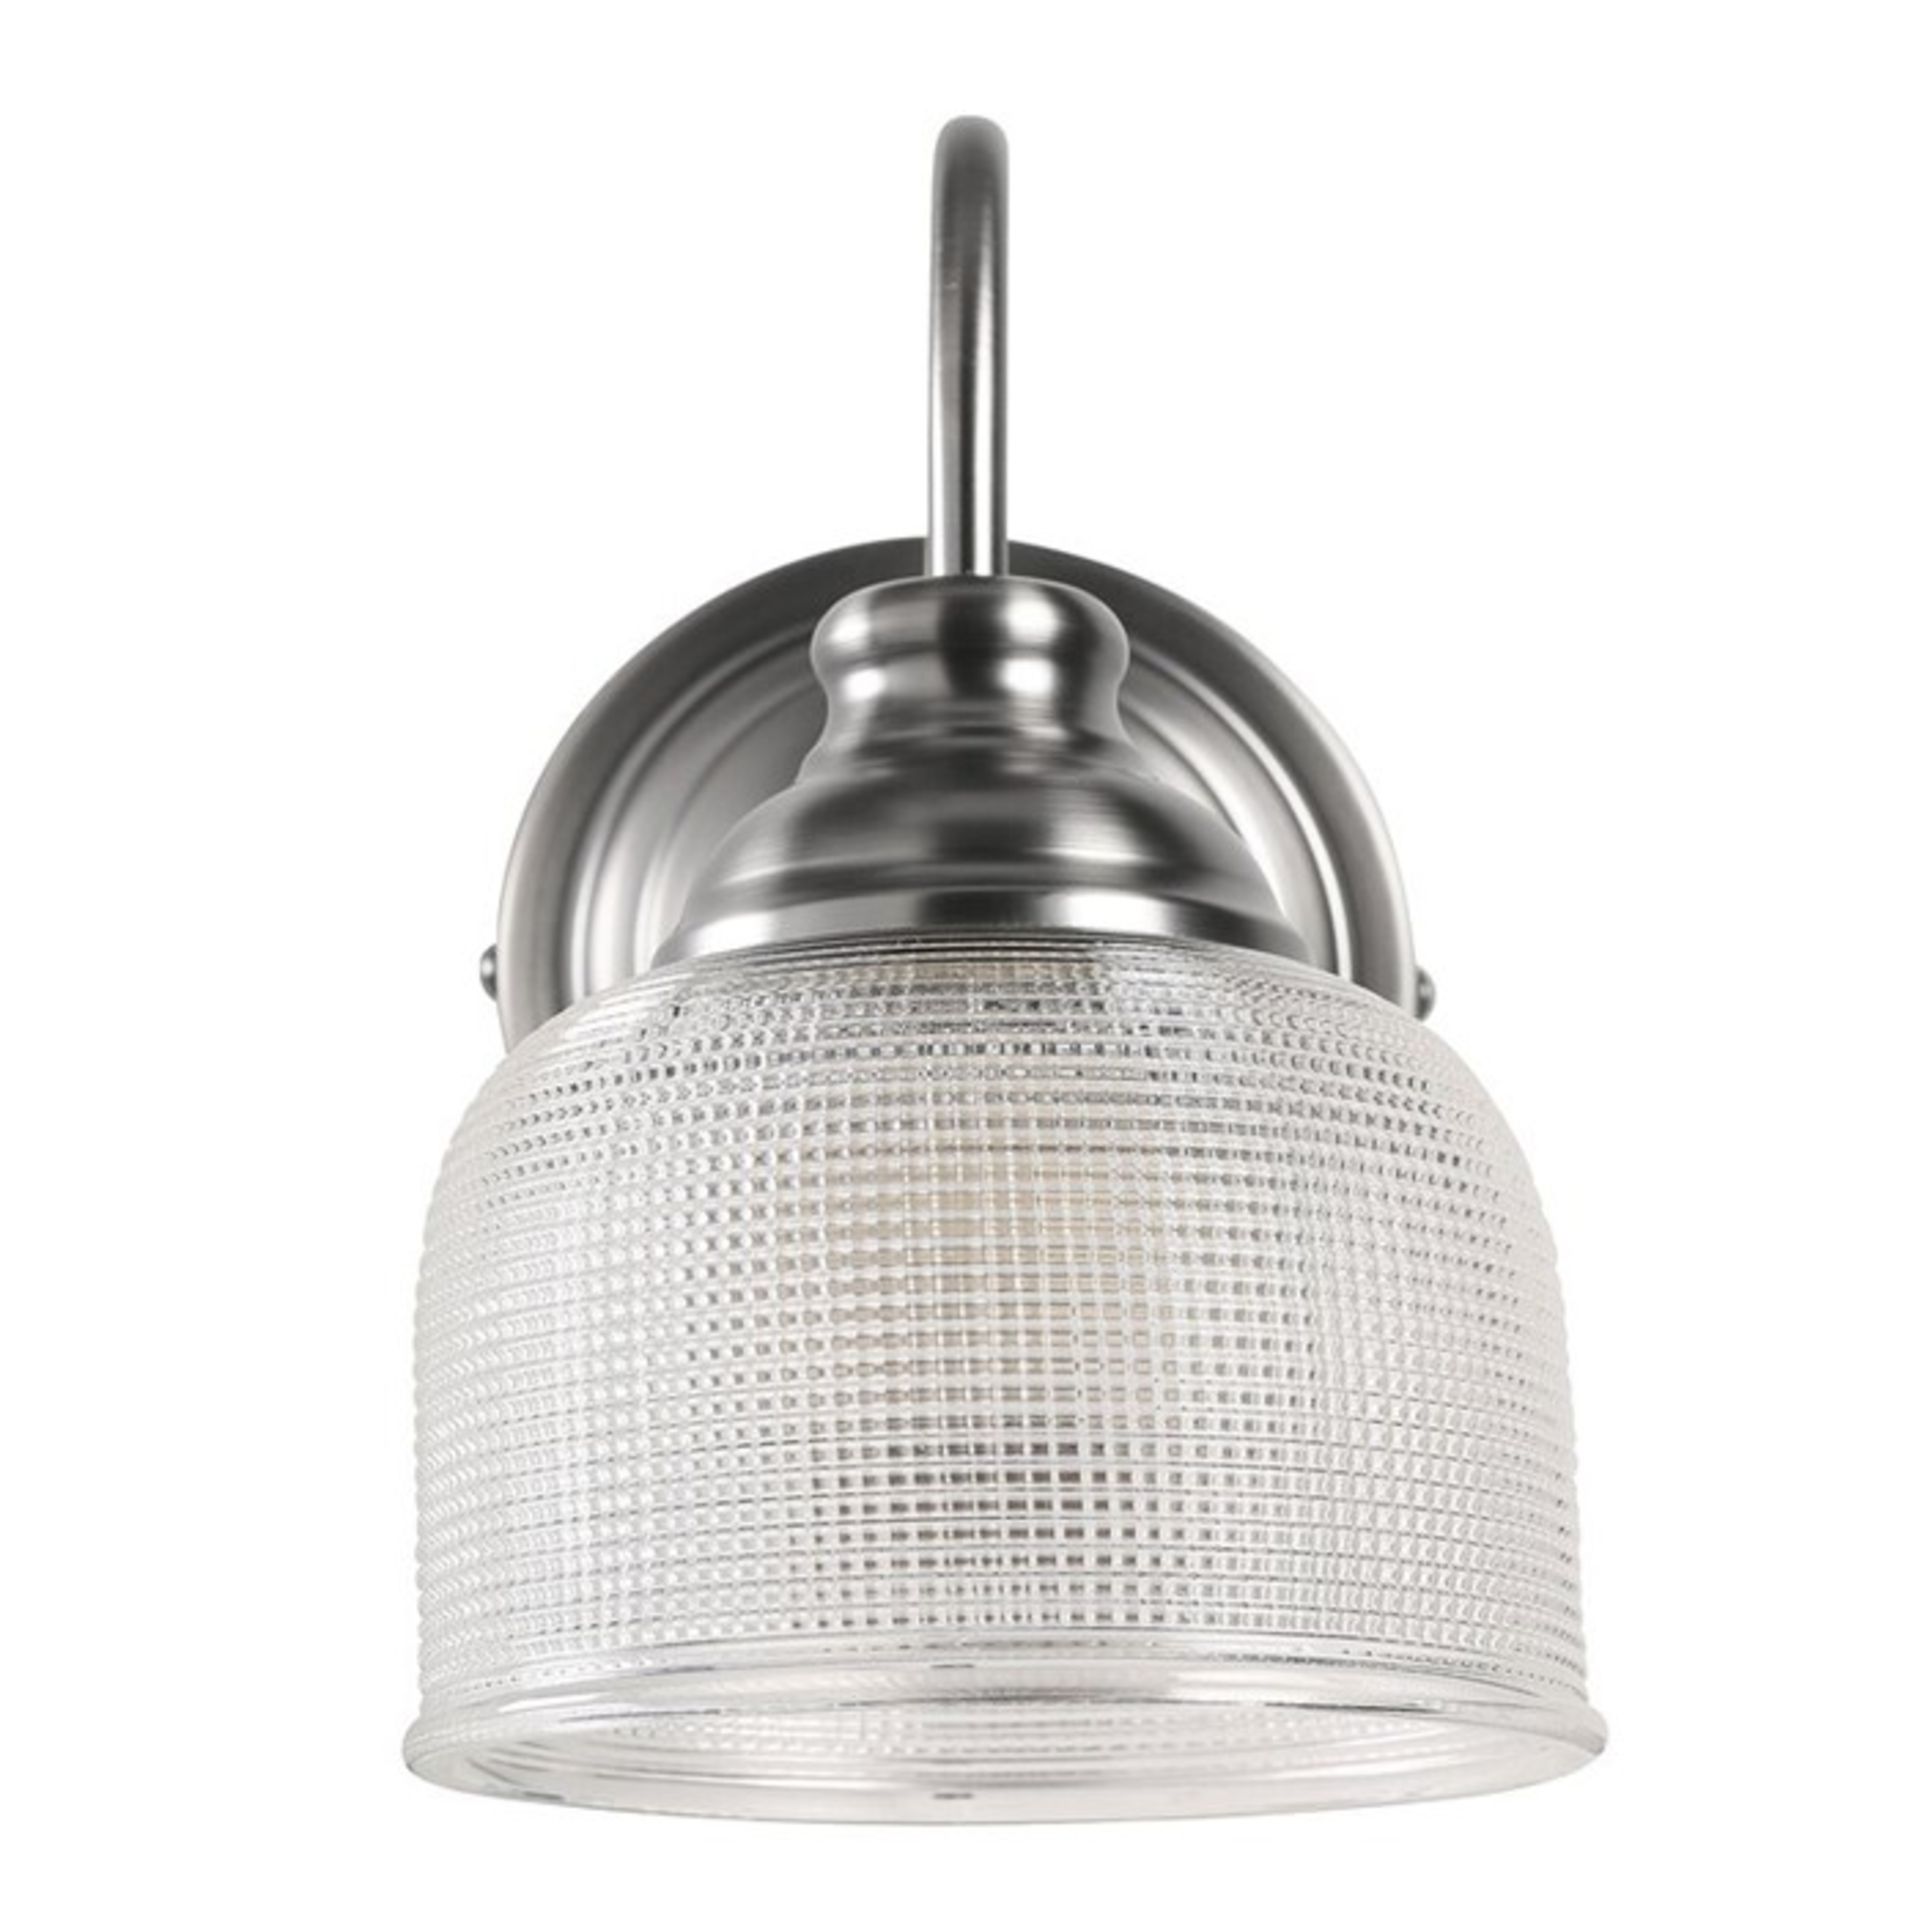 Marlow Home Co., Axl 1-Light Armed Sconce (ANTIQUE CHROME AND TEXTURED GLASS) - RRP £25.99 (